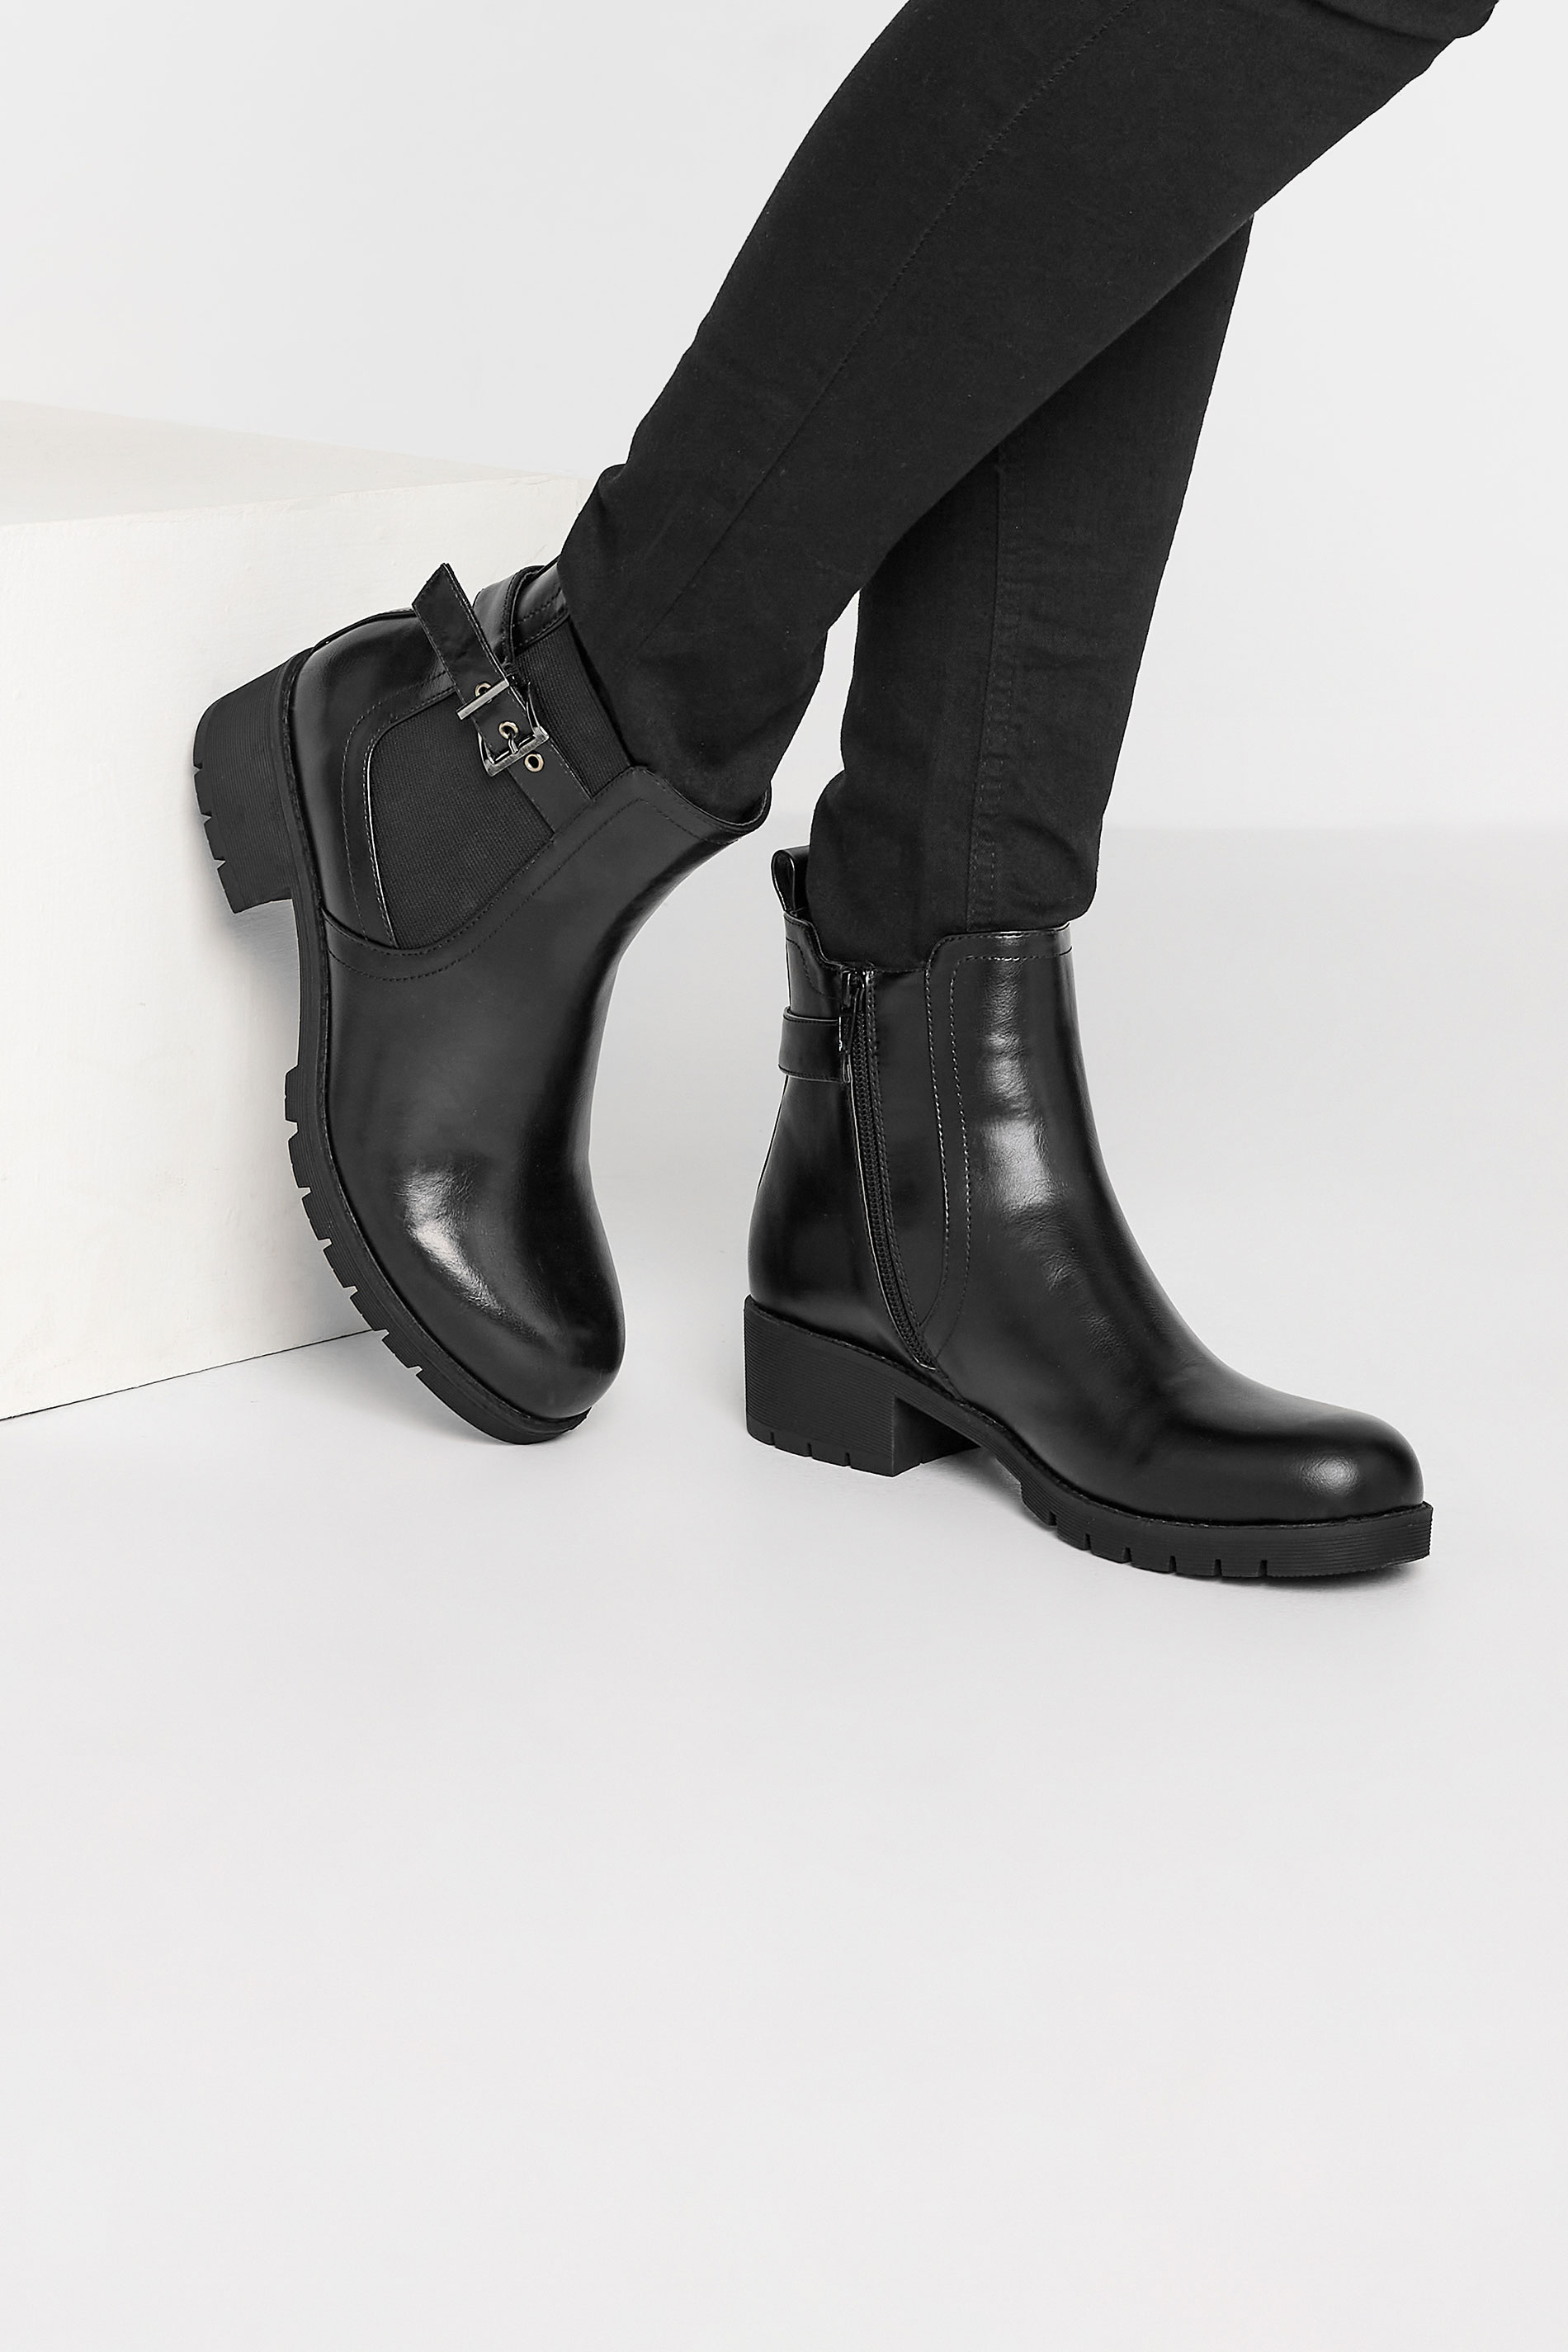 LTS Black Buckle Ankle Boots In Standard Fit | Long Tall Sally 1